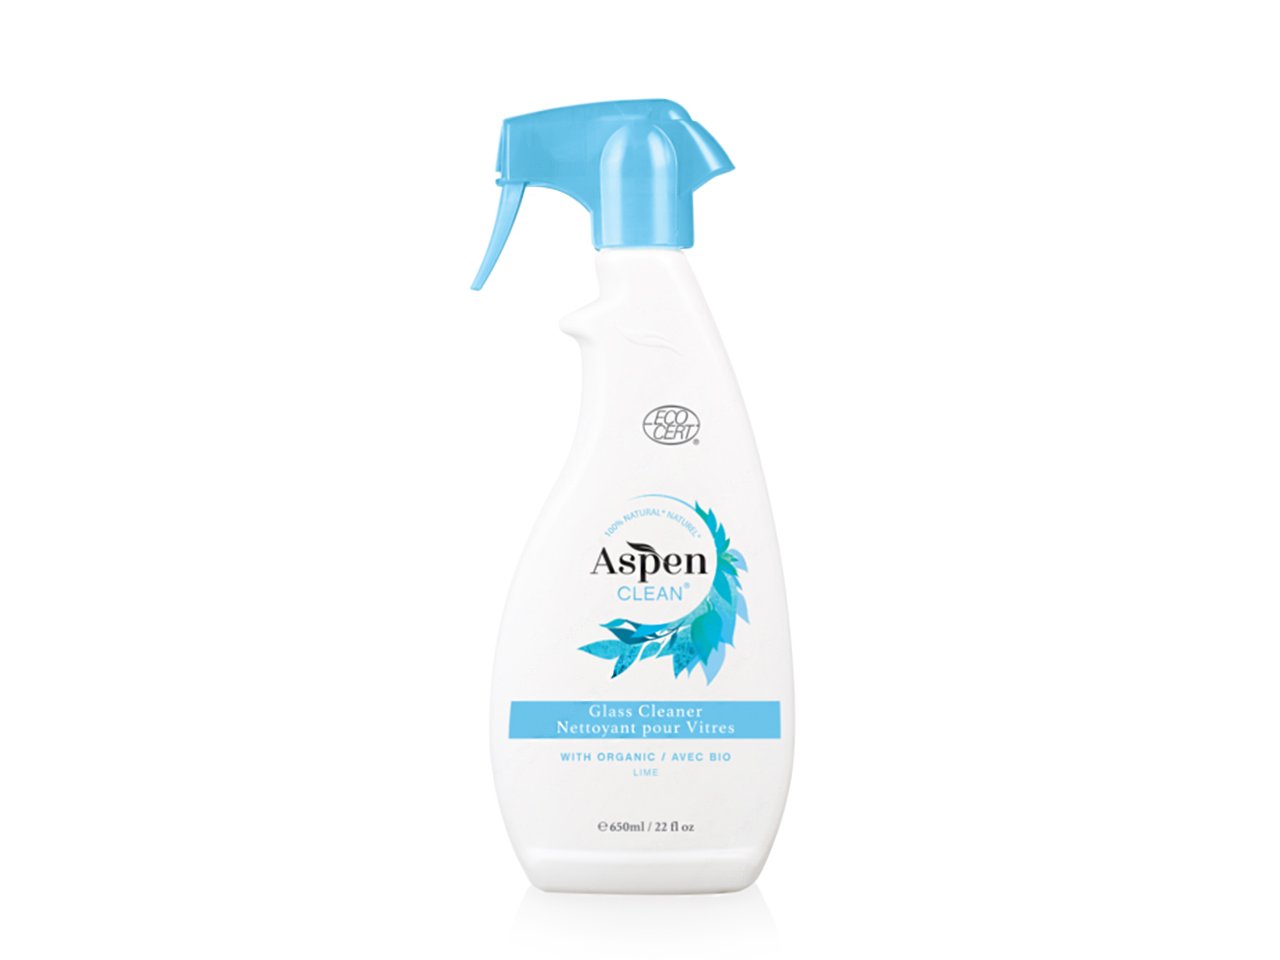 Eco-friendly cleaners, white Aspen Clean glass cleaner bottle with blue spray top